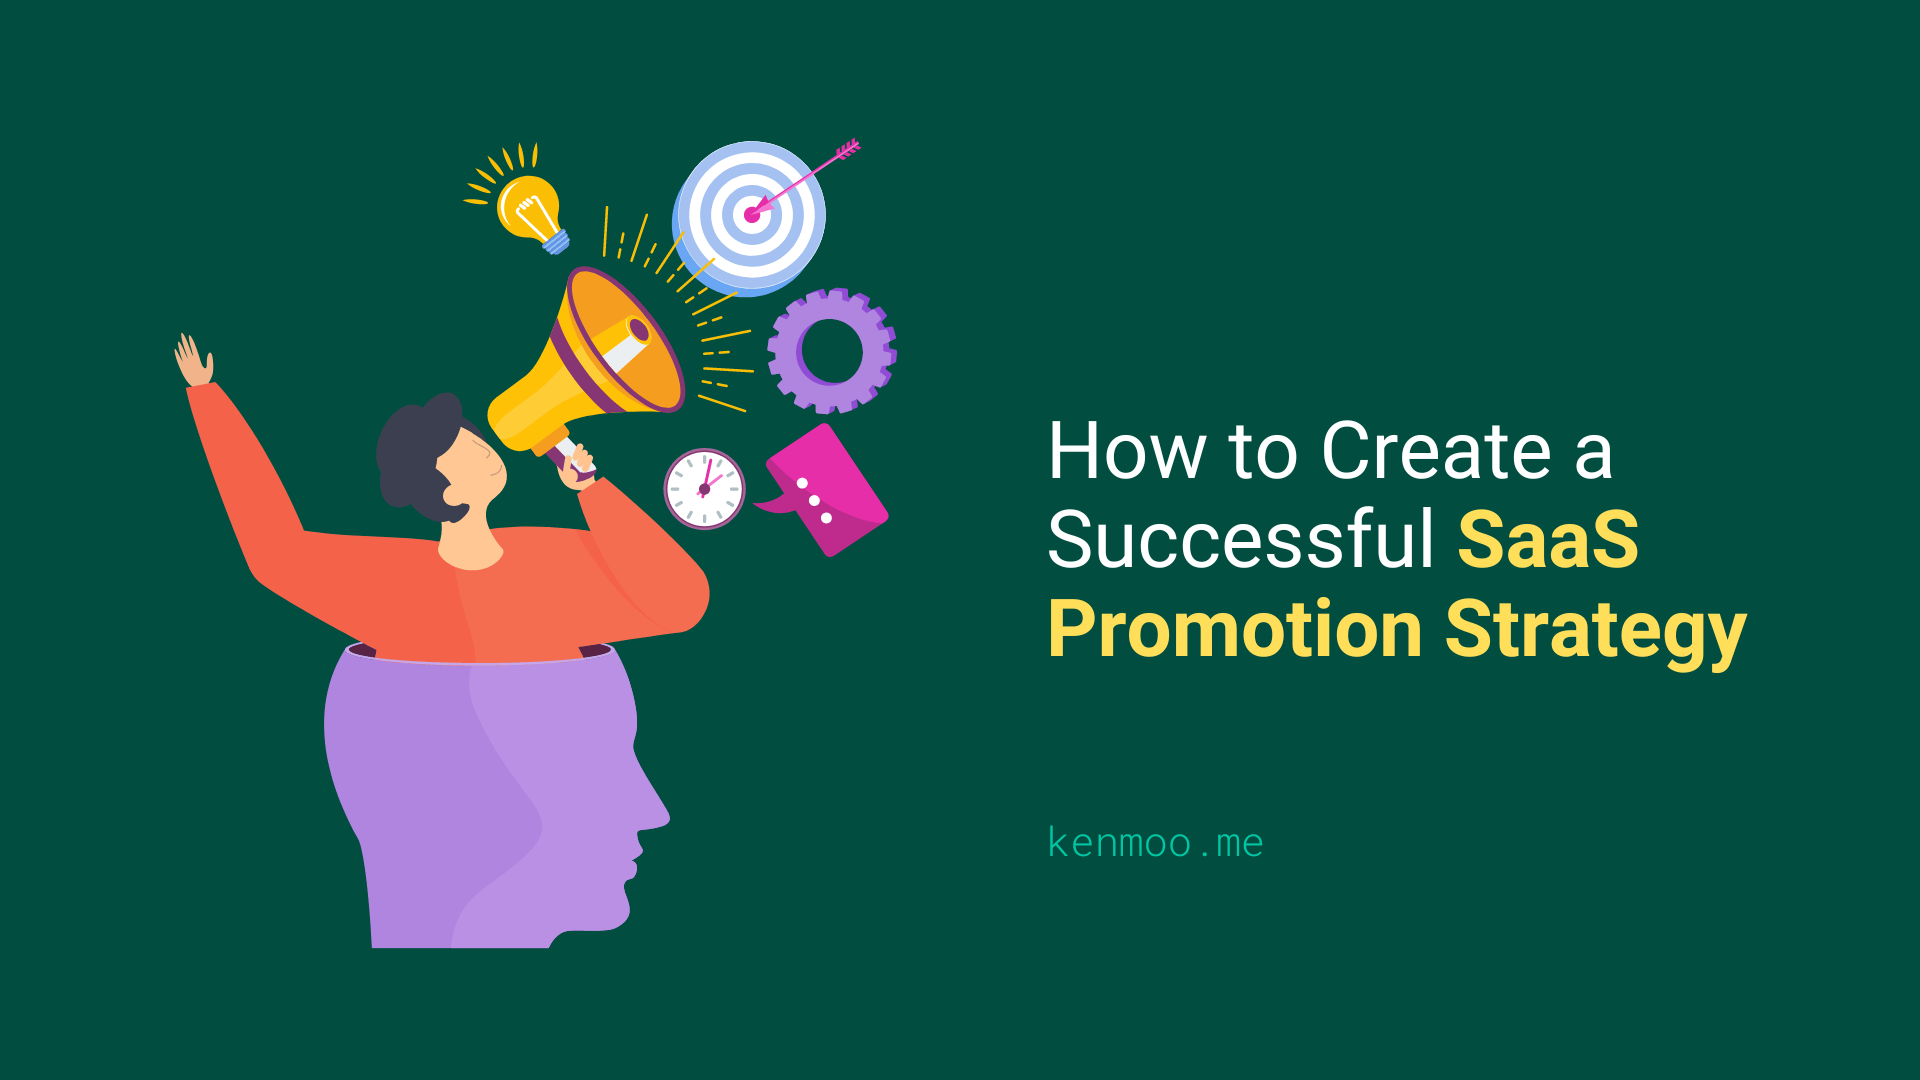 How to Create a Successful SaaS Promotion Strategy